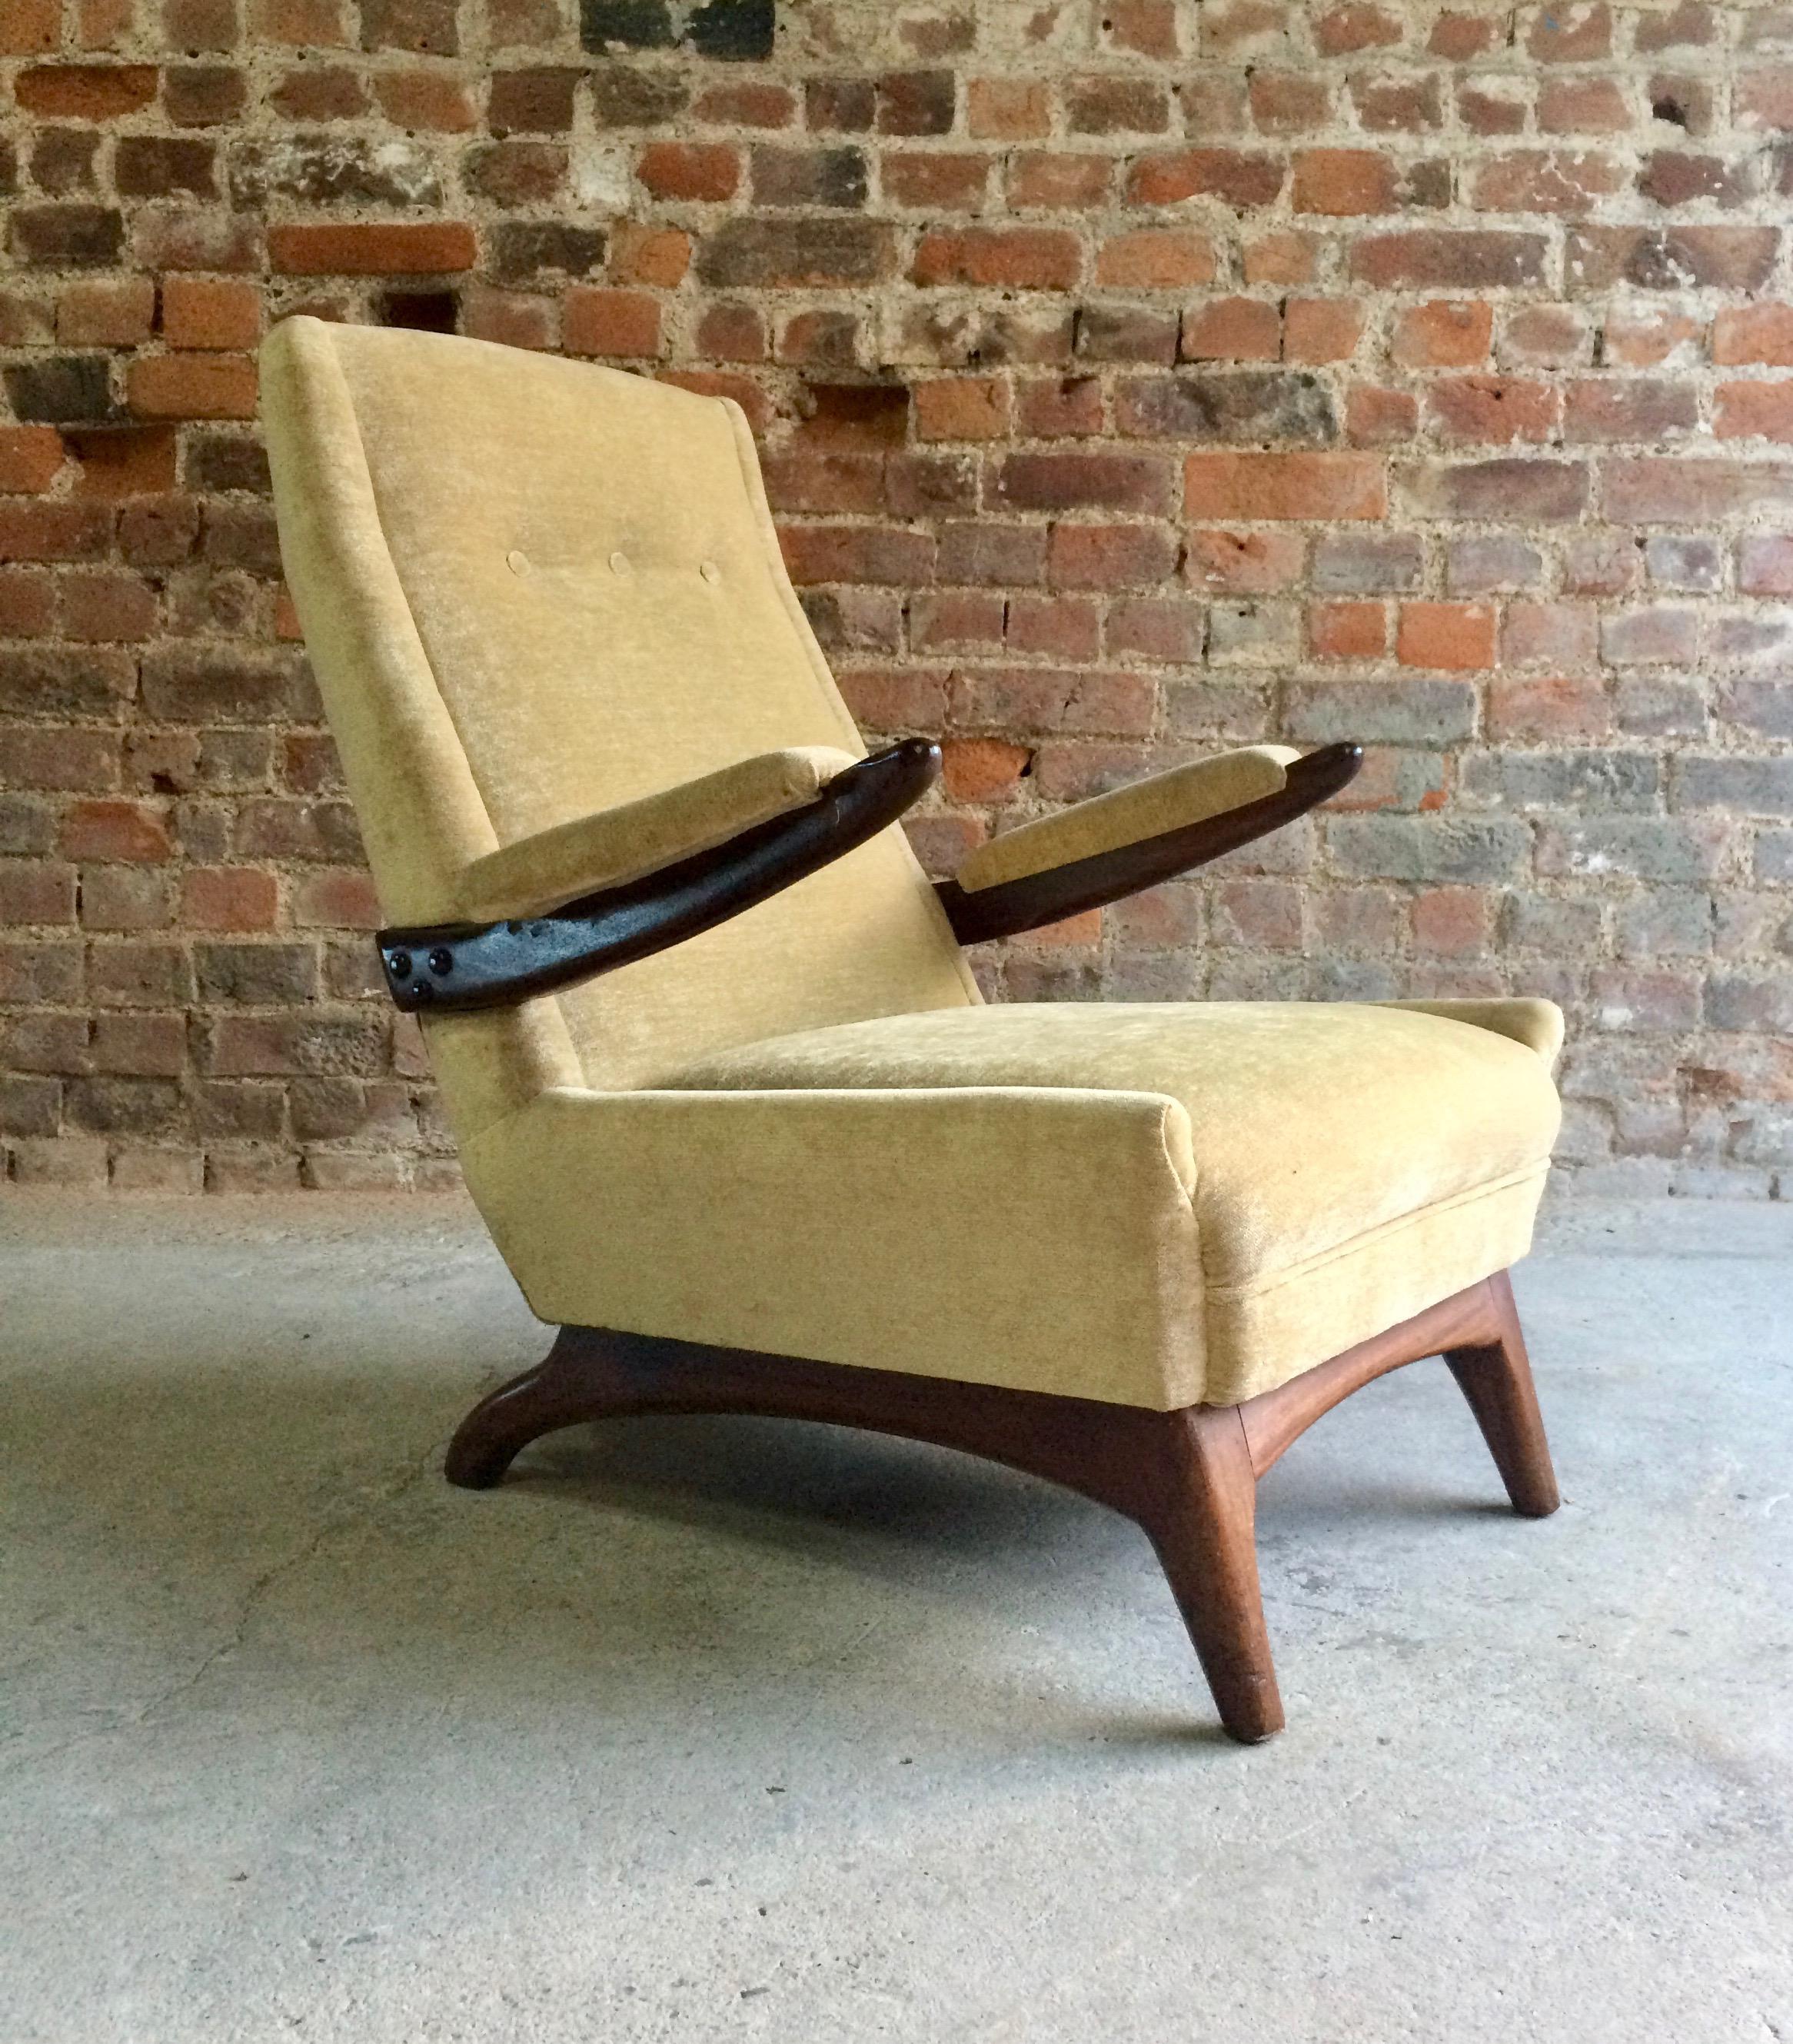 Midcentury Greaves and Thomas armchair, circa 1950
Magnificent midcentury recently upholstered armchair by the iconic British furniture maker Greaves and Thomas circa 1950s, finished in a fabulous pale yellow velour material sitting on a Afromosia